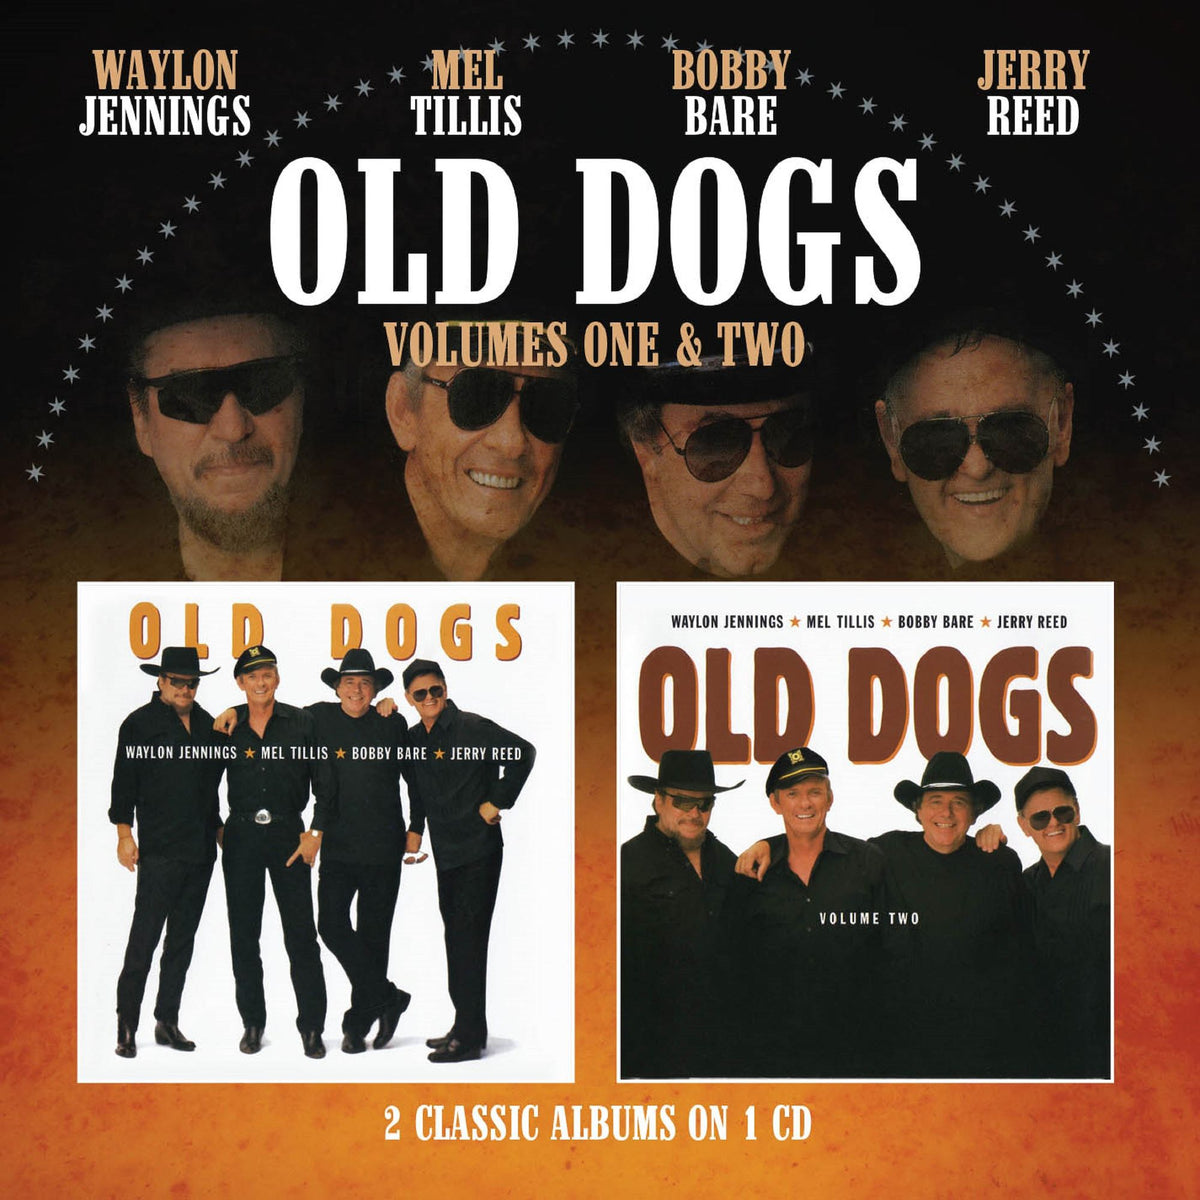 Old Dogs: Volumes One & Two